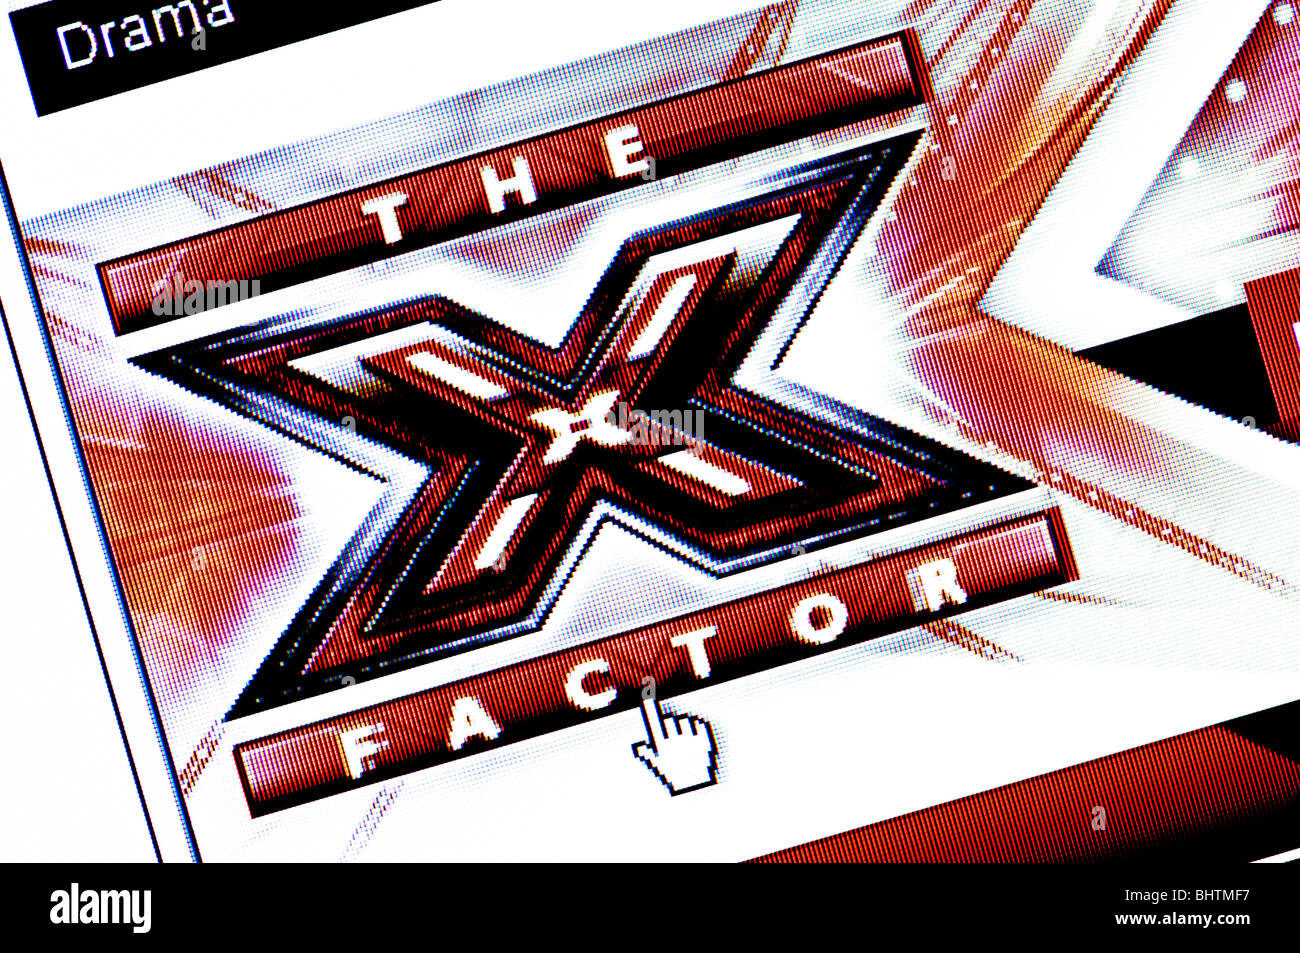 Macro screenshot of the website of The X Factor TV show - wannabe pop stars can now upload audition videos. Editorial use only. Stock Photo